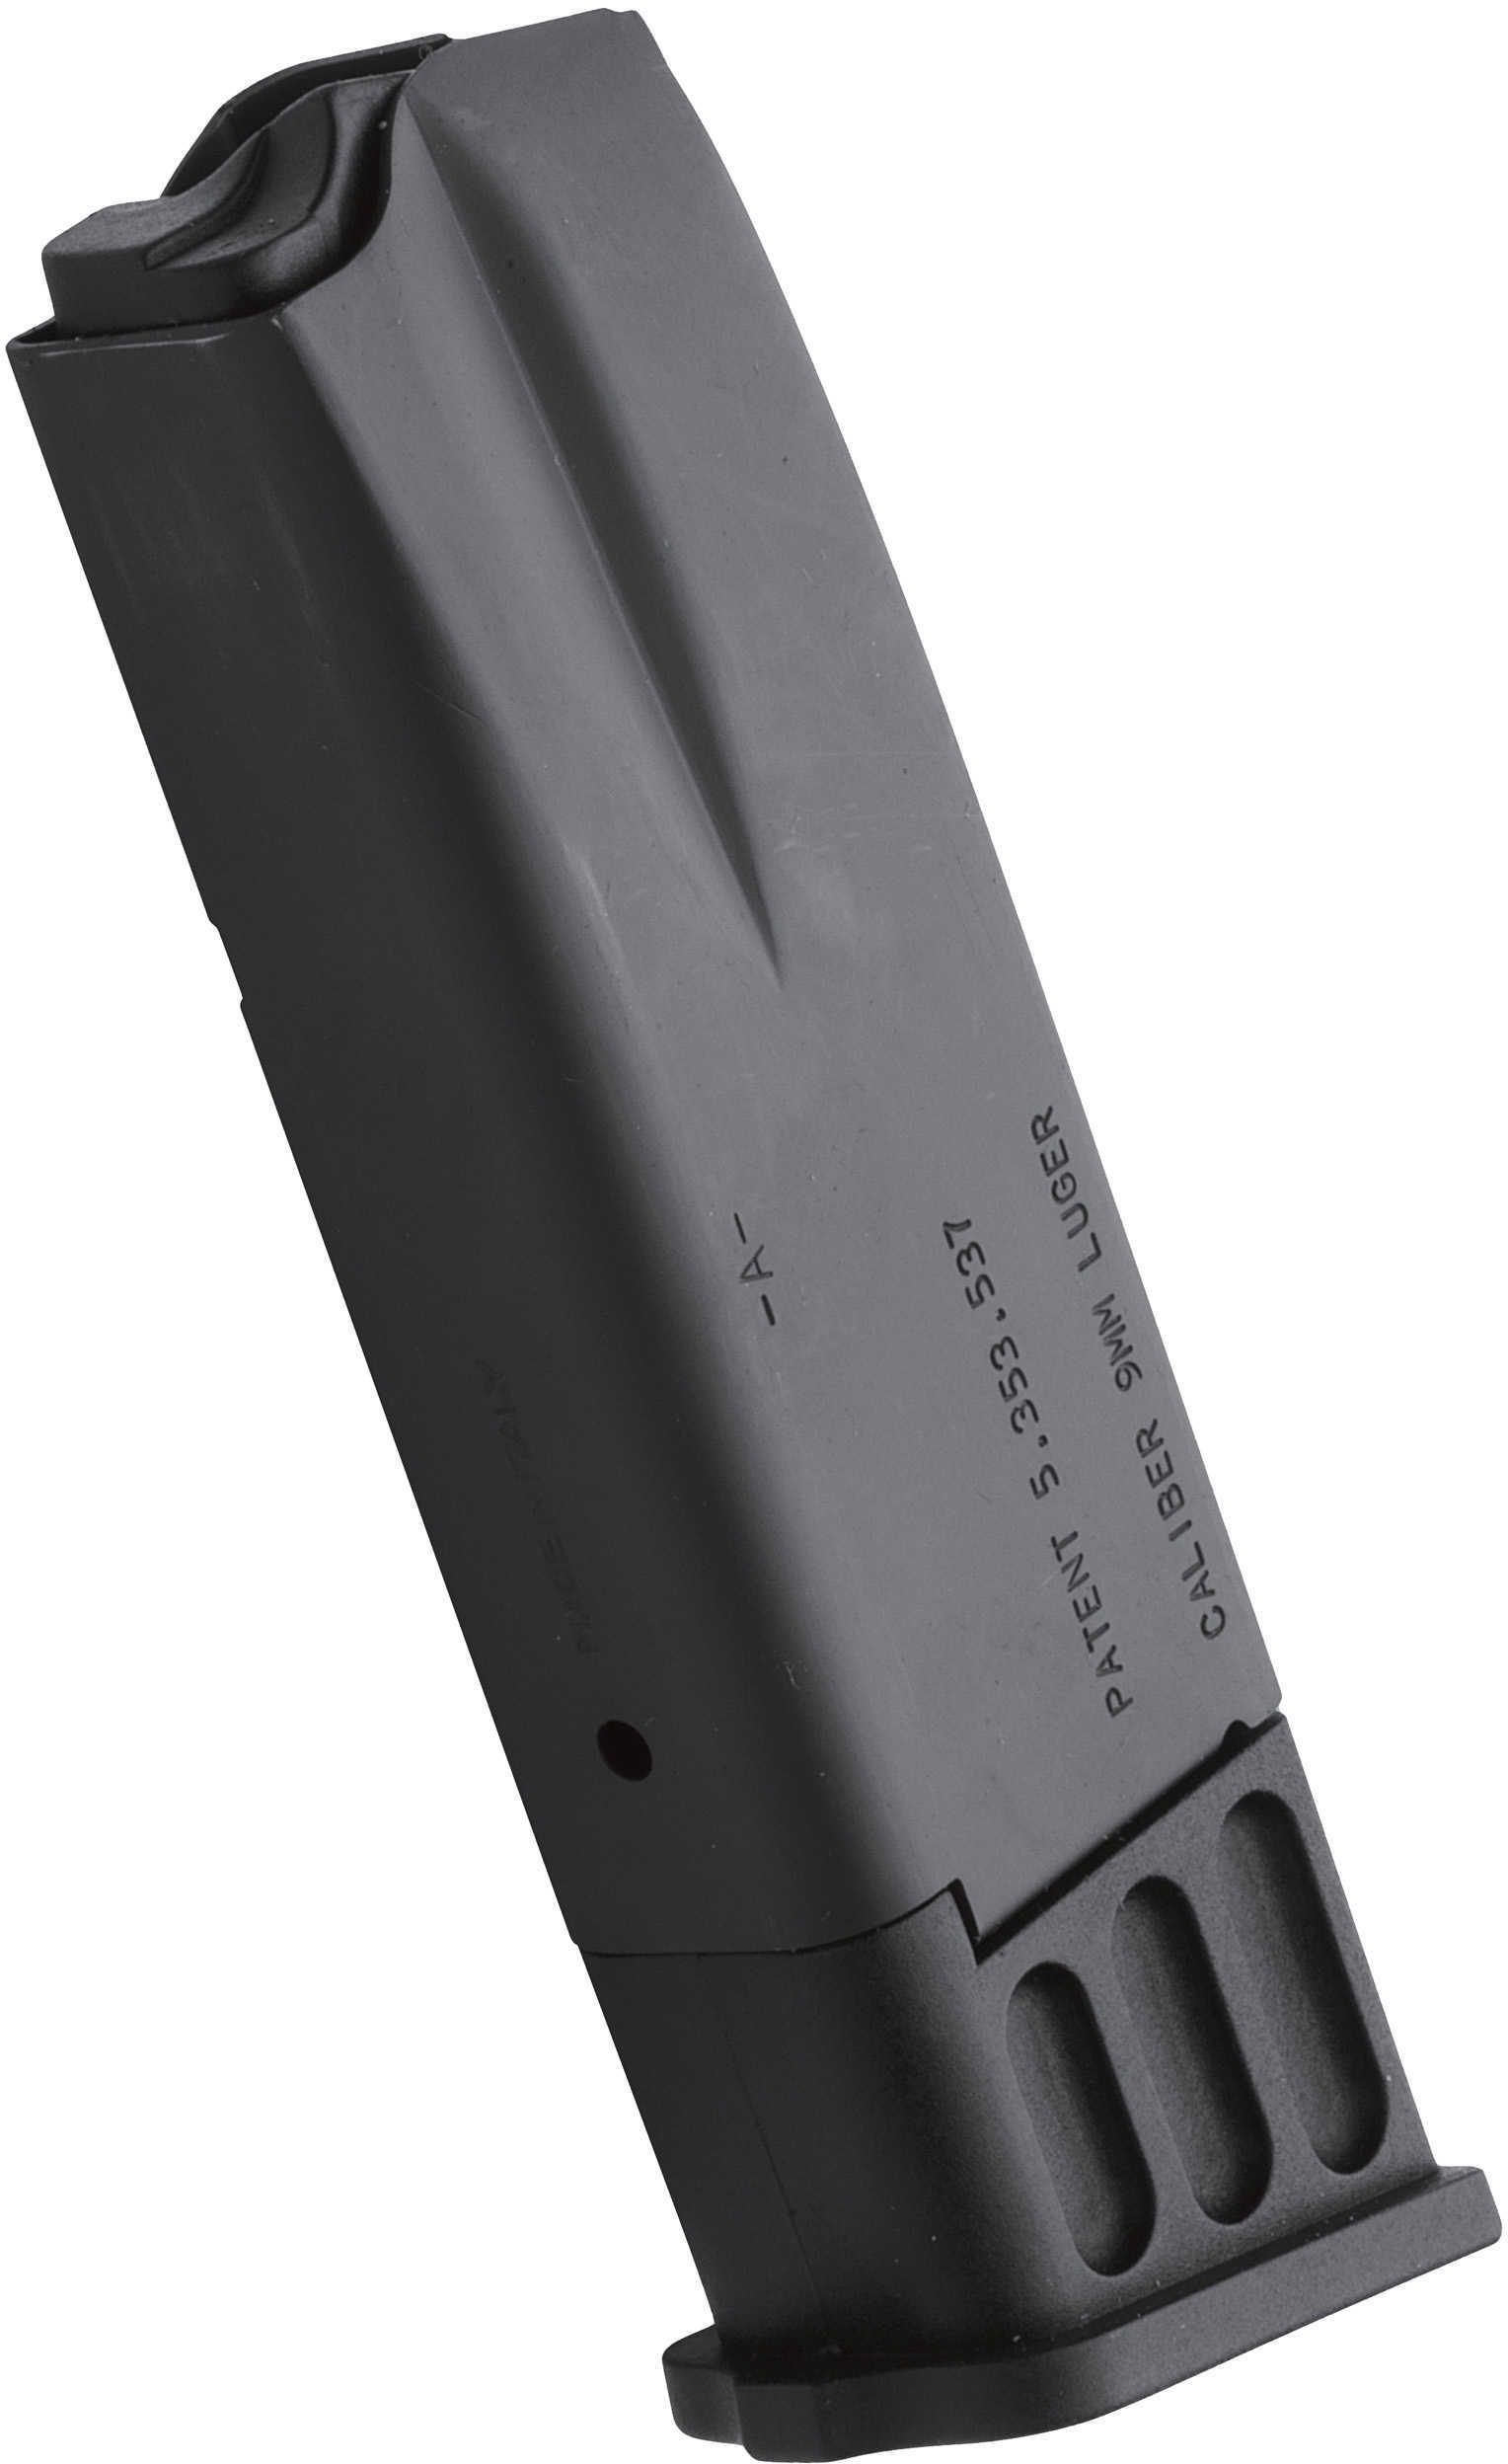 Browning 13 Round 9MM Hi Power Standard Magazine With Black Finish Md: 112050293